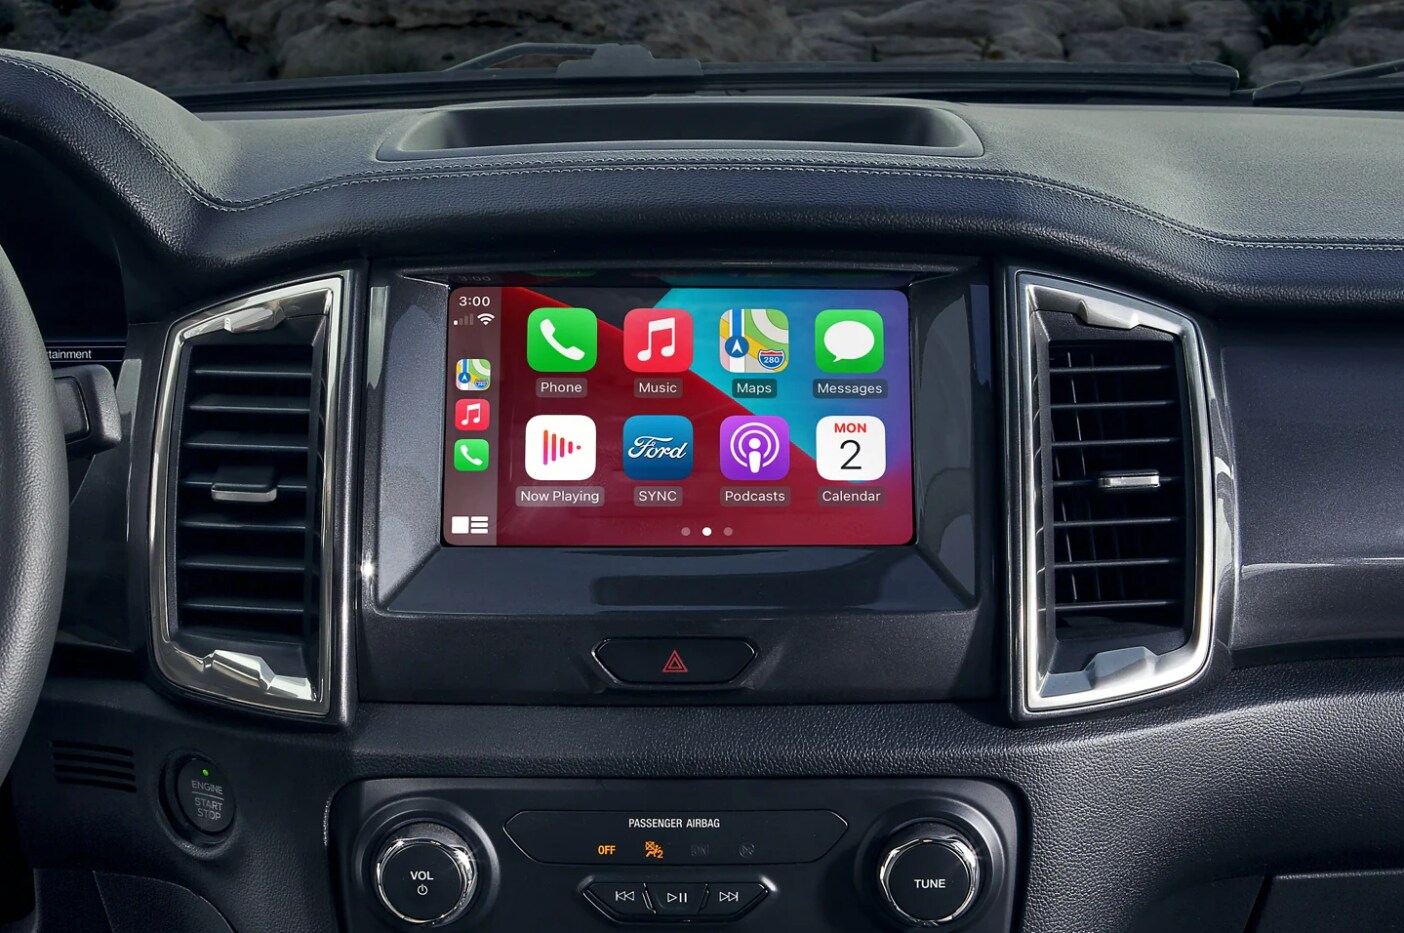 A closeup of the infotainment interface in the dash of the 2023 Ford Ranger